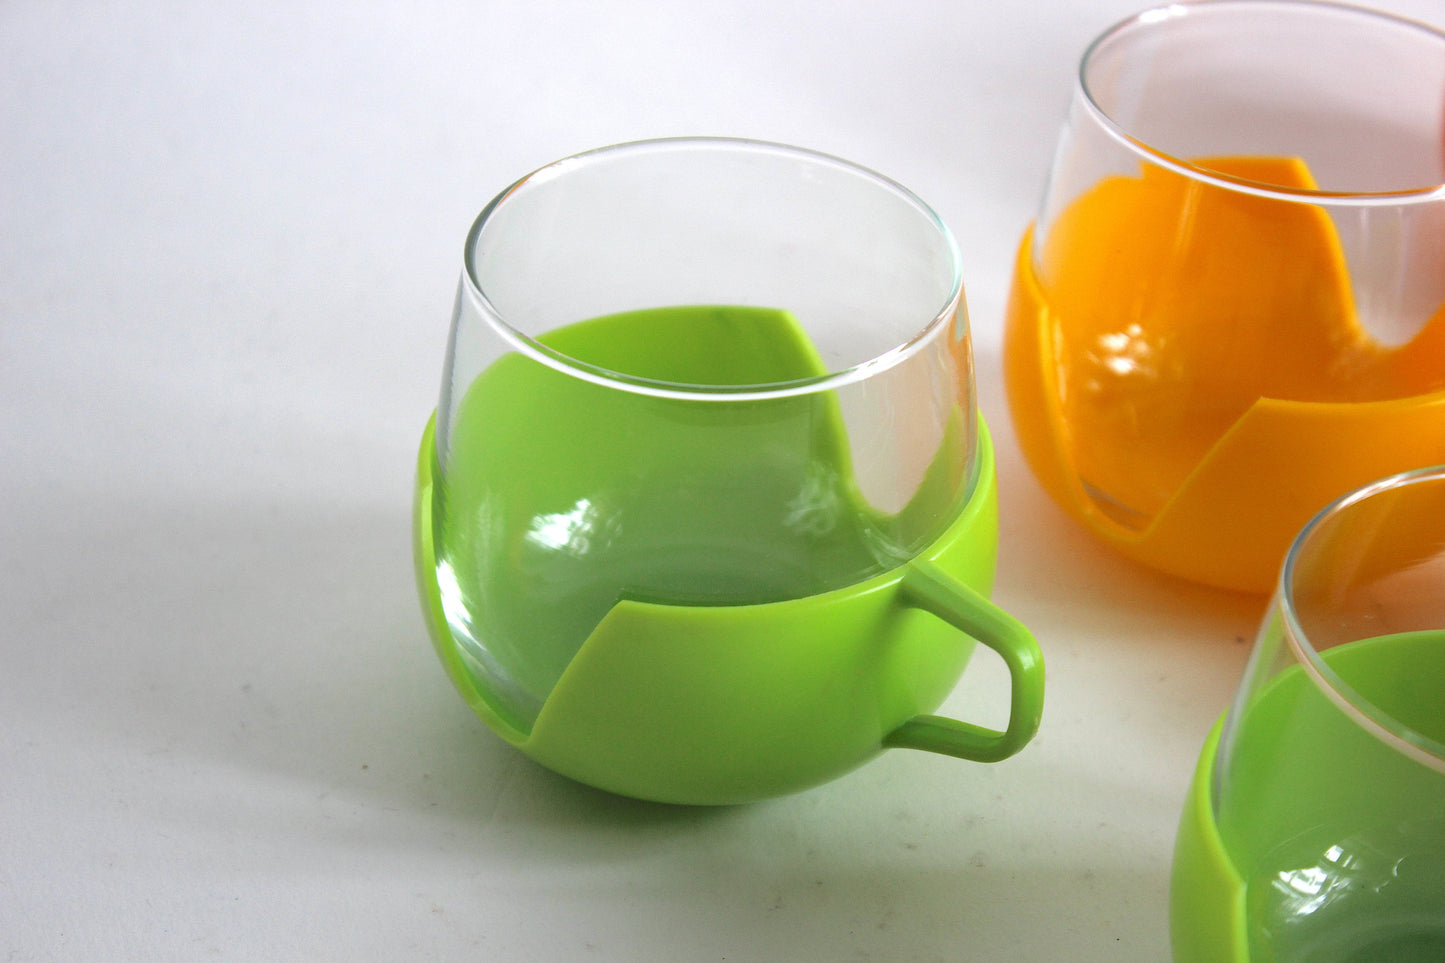 Set of 9 multicolored  glass tumblers for tea or coffee with plastic handles - Holland 60s / 70s